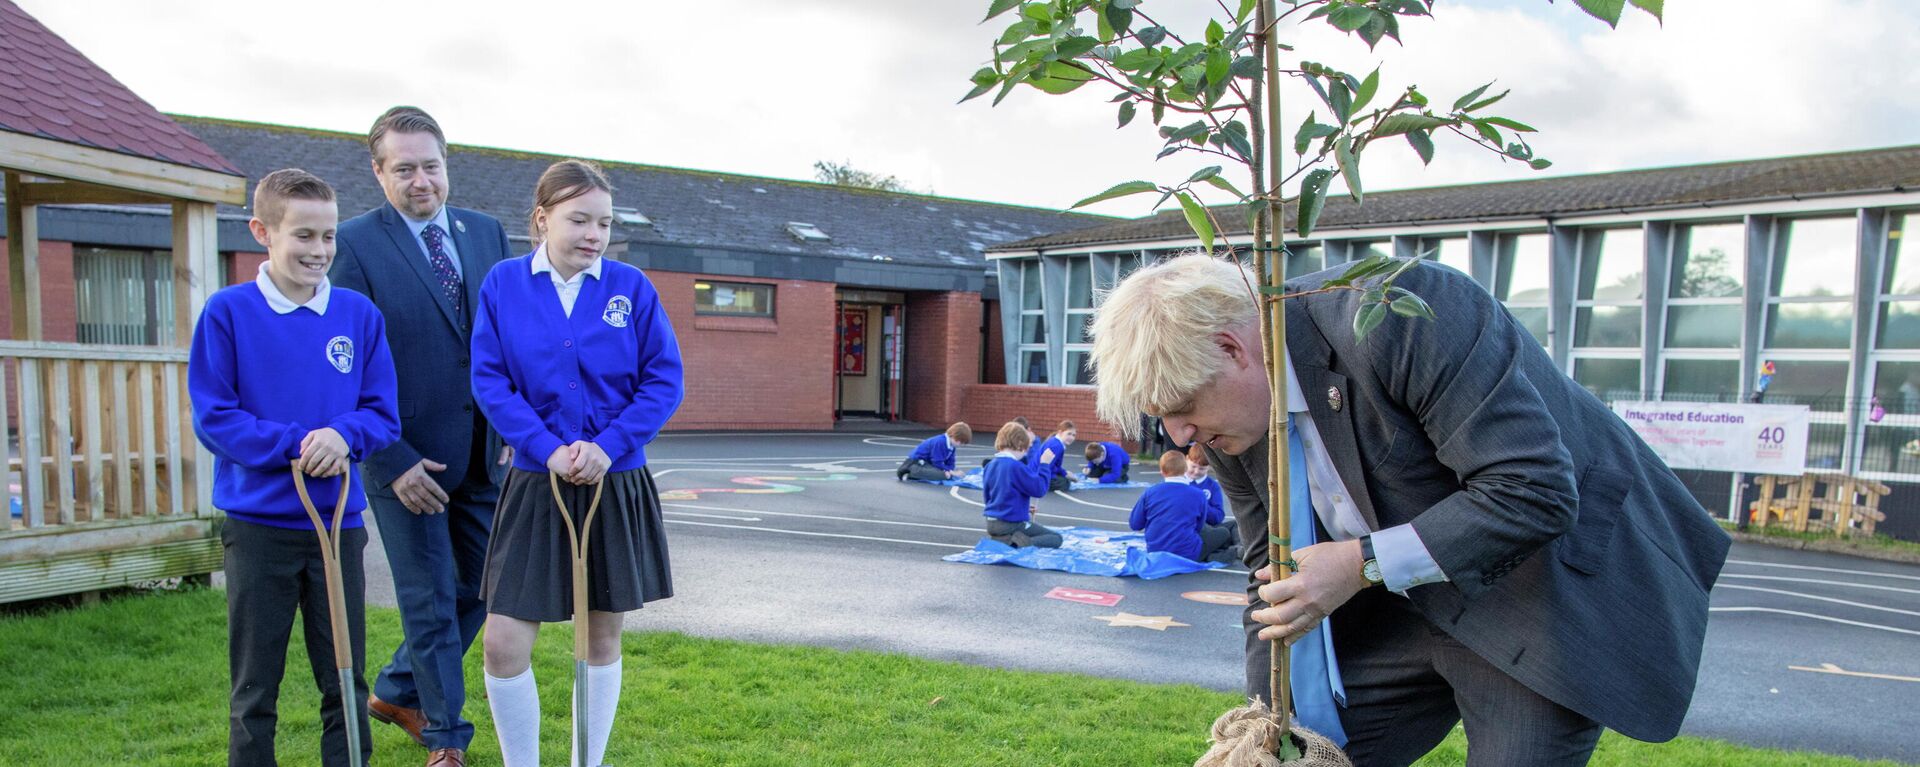 Britain's Prime Minister Boris Johnson plants a tree during a visit to Crumlin Integrated Primary School in County Antrim - Sputnik International, 1920, 25.10.2021